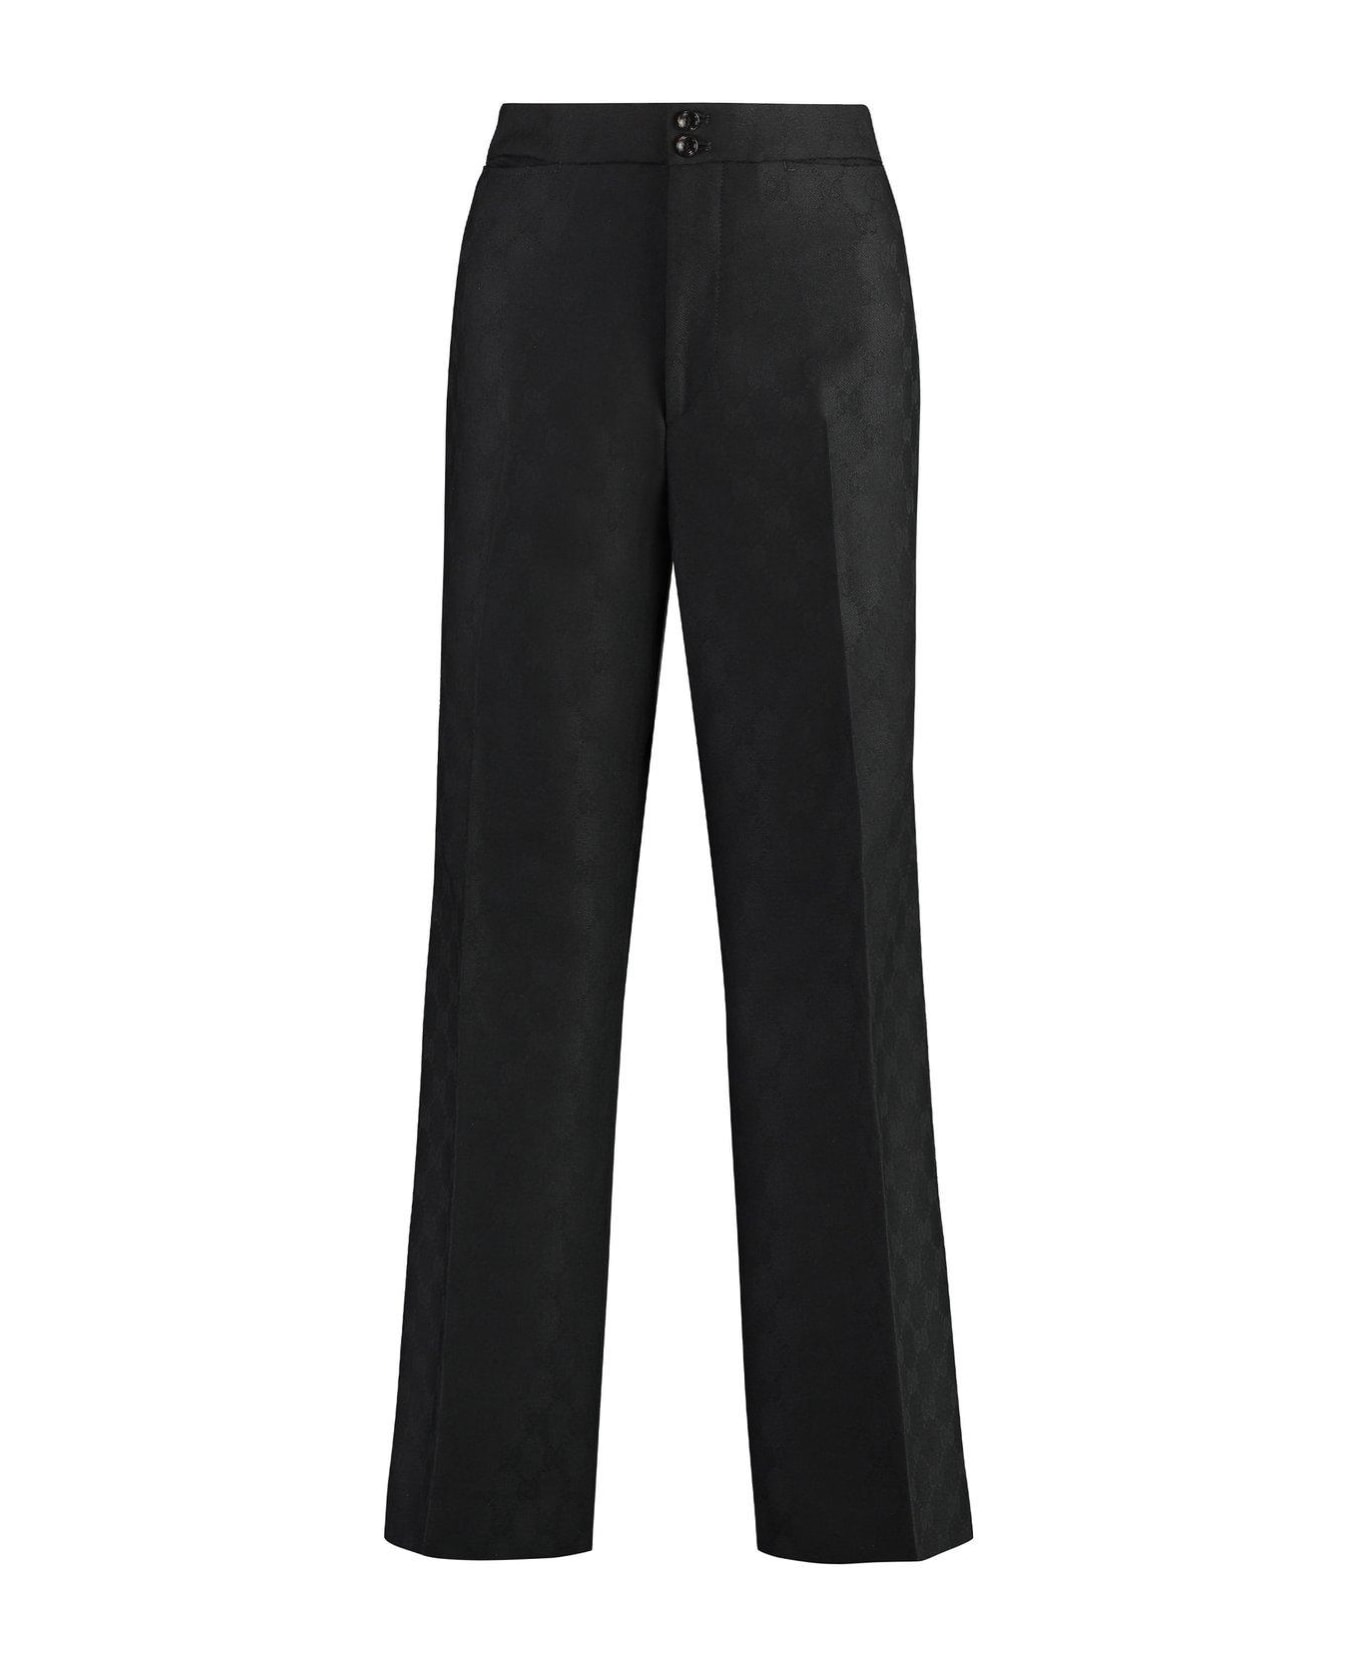 Gucci Gg Jacquard Tailored Trousers - Black ボトムス